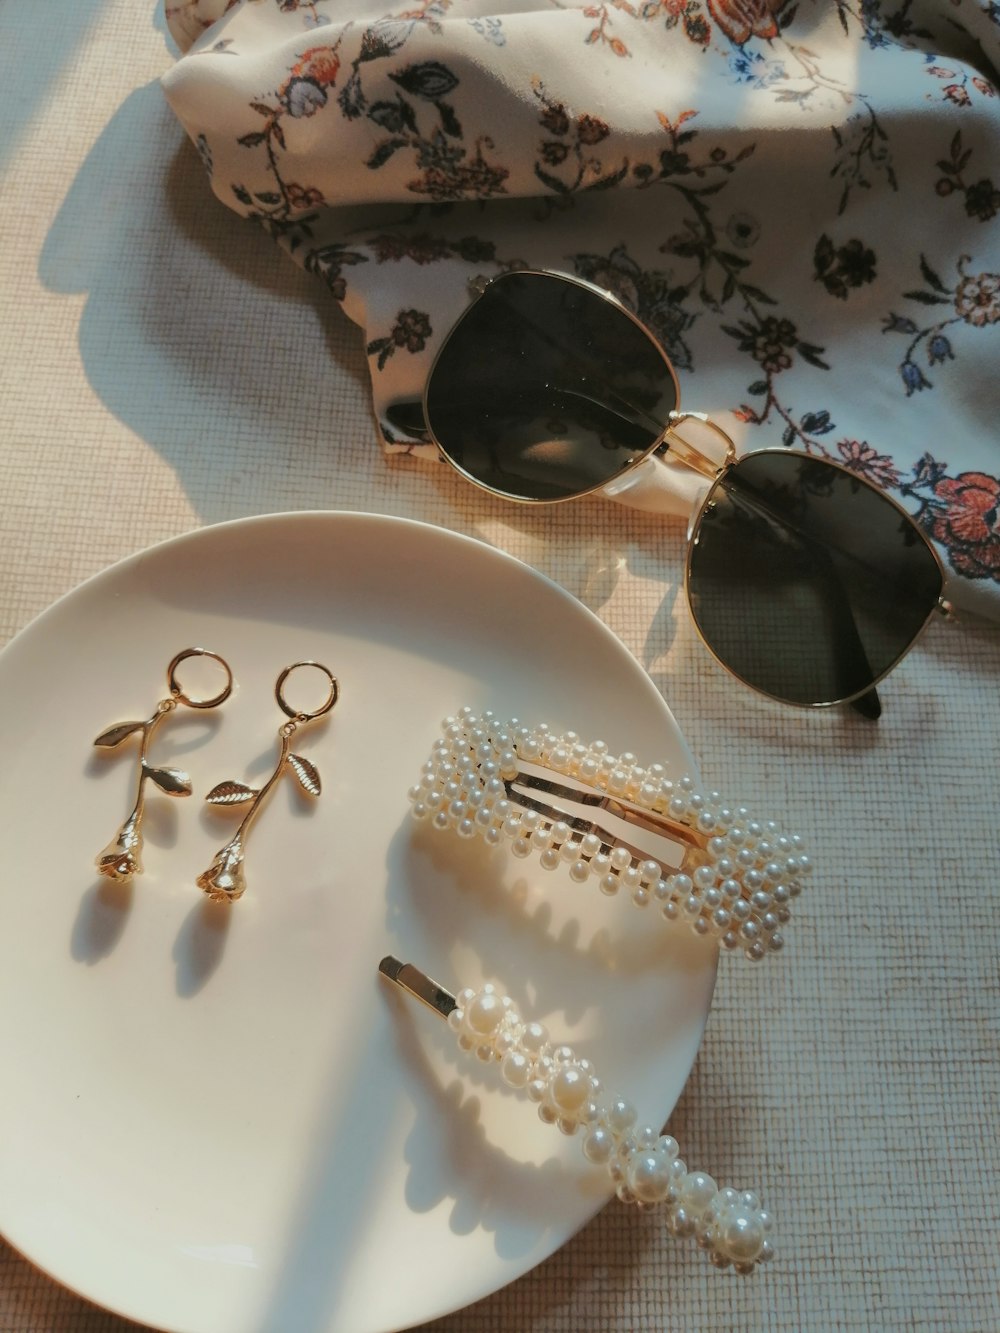 earrings and hair clip on plate